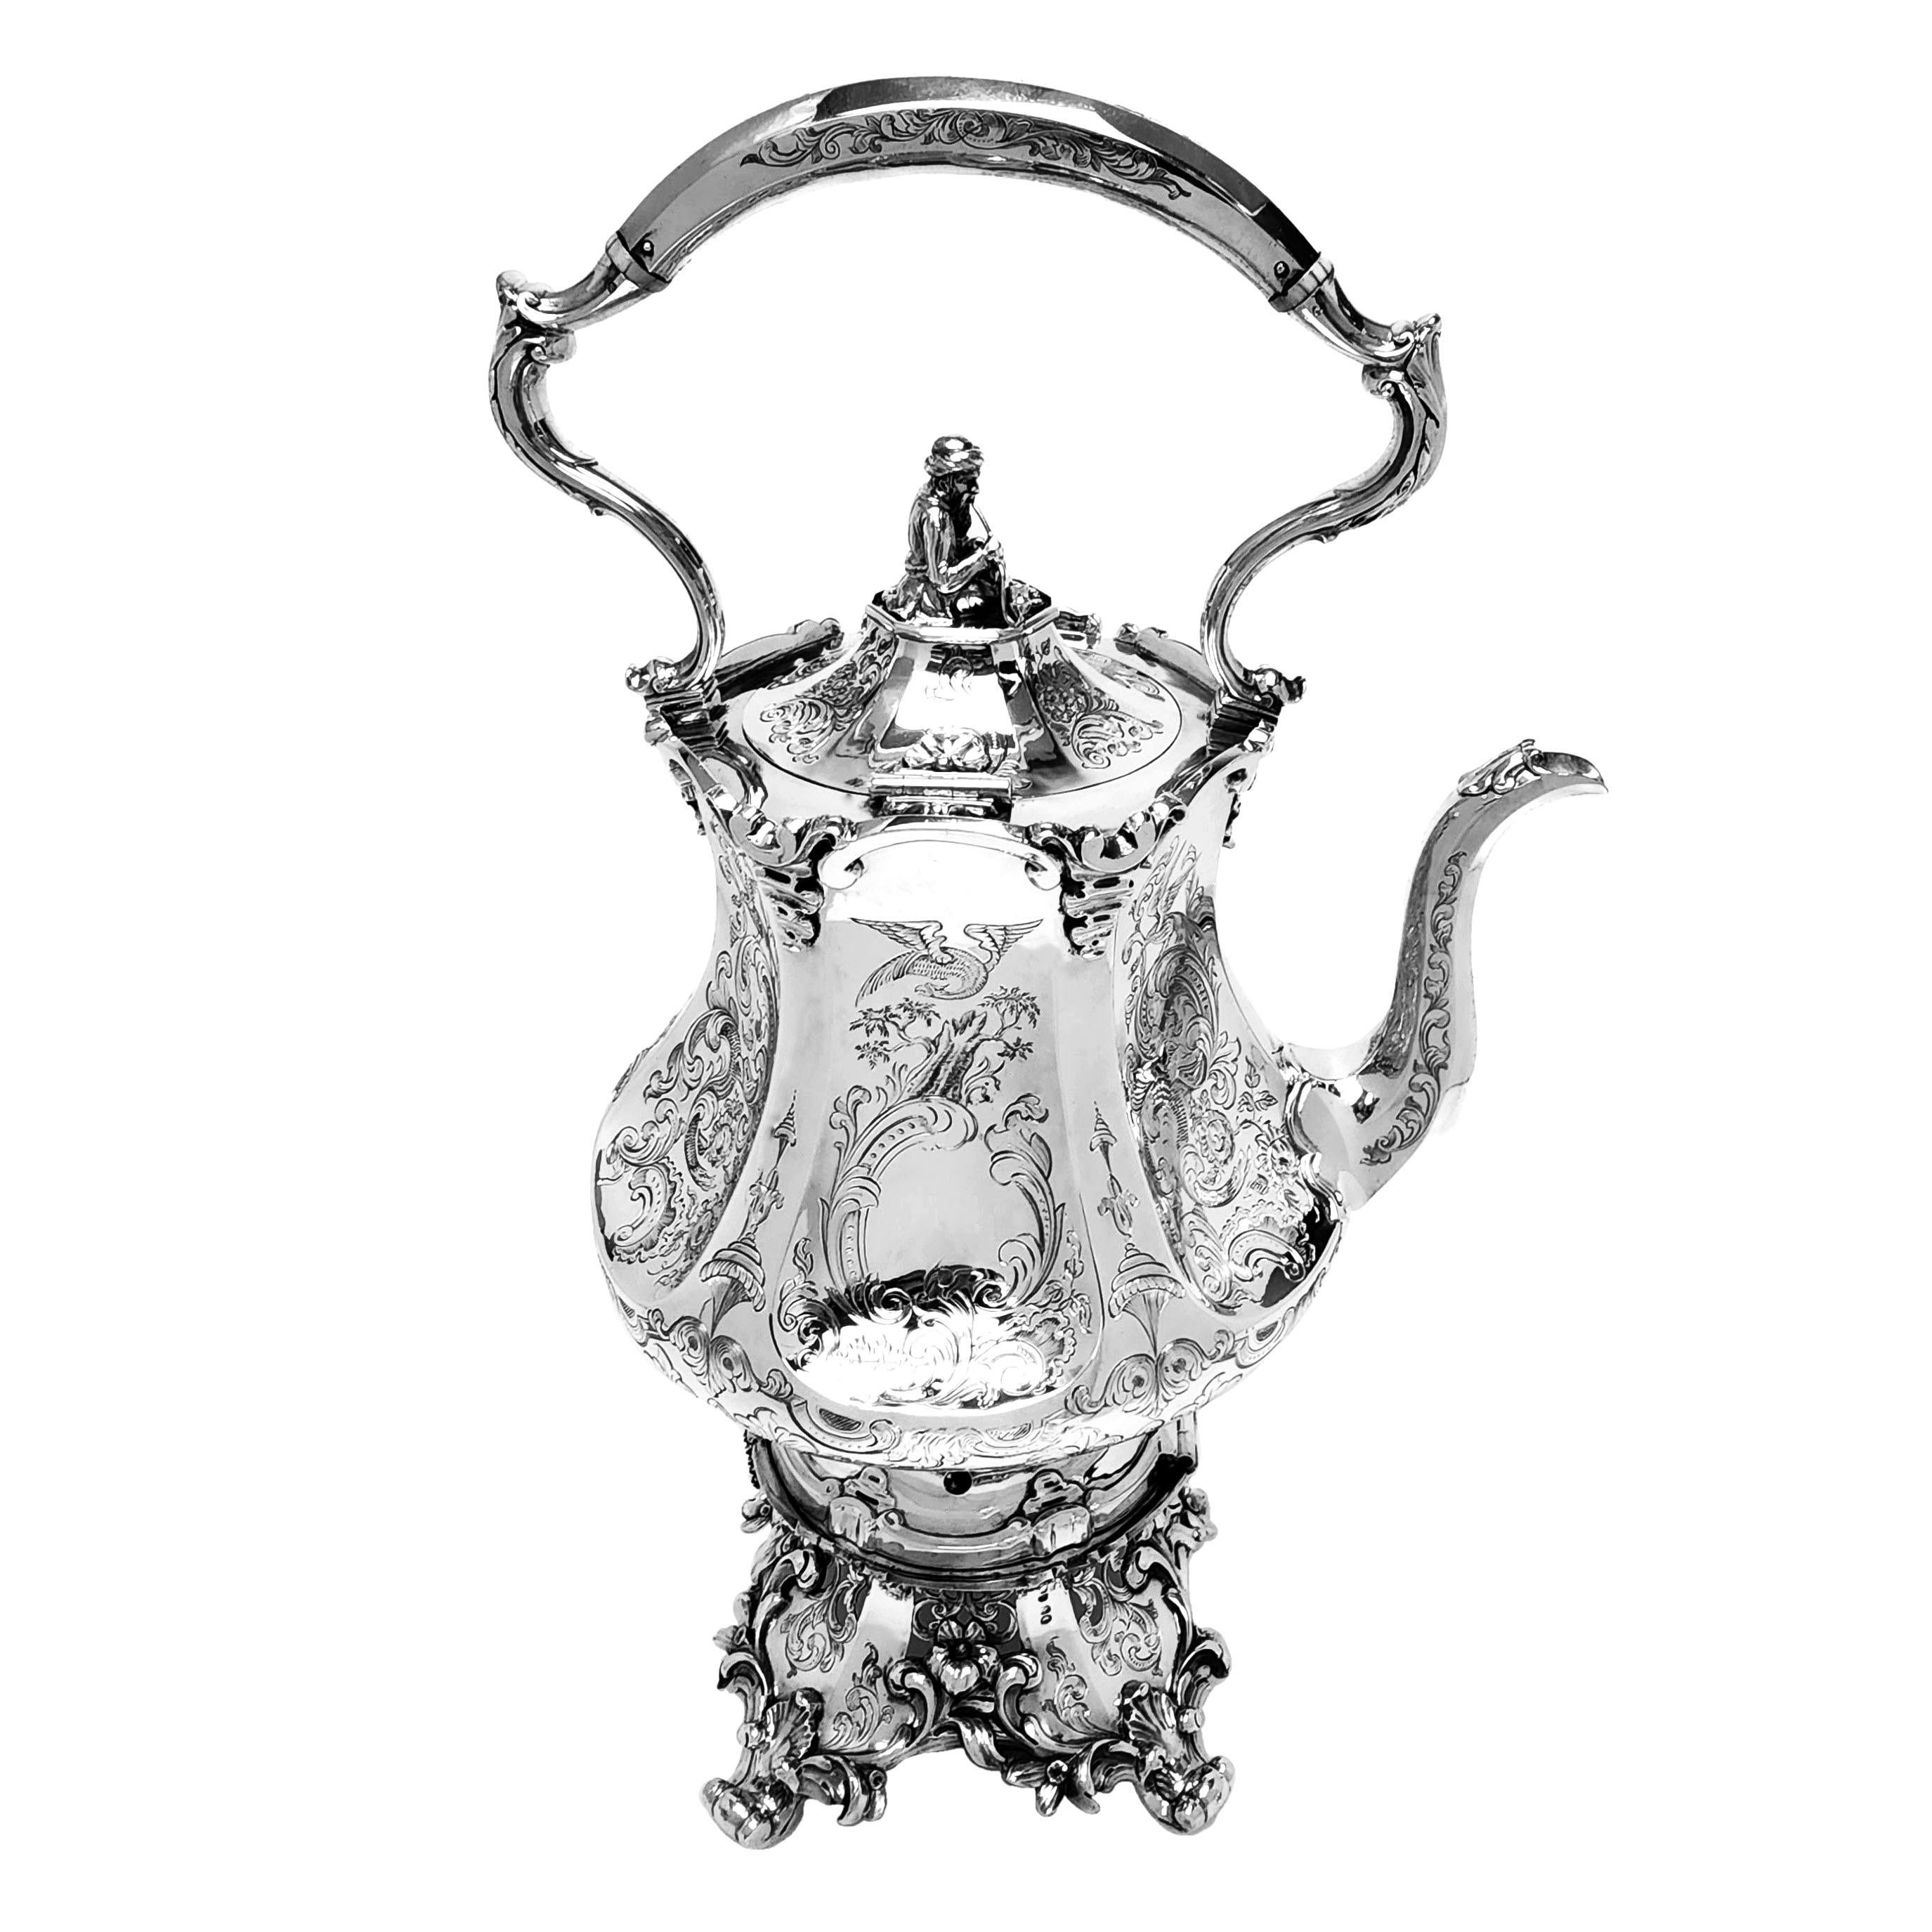 A magnificent solid silver antique Victorian Kettle on stand. The Kettle has a delicately faceted shape with each panel featuring a detailed engraved design featuring birds, scrolls and stylised leaves and flowers. The Kettle rests on an ornate